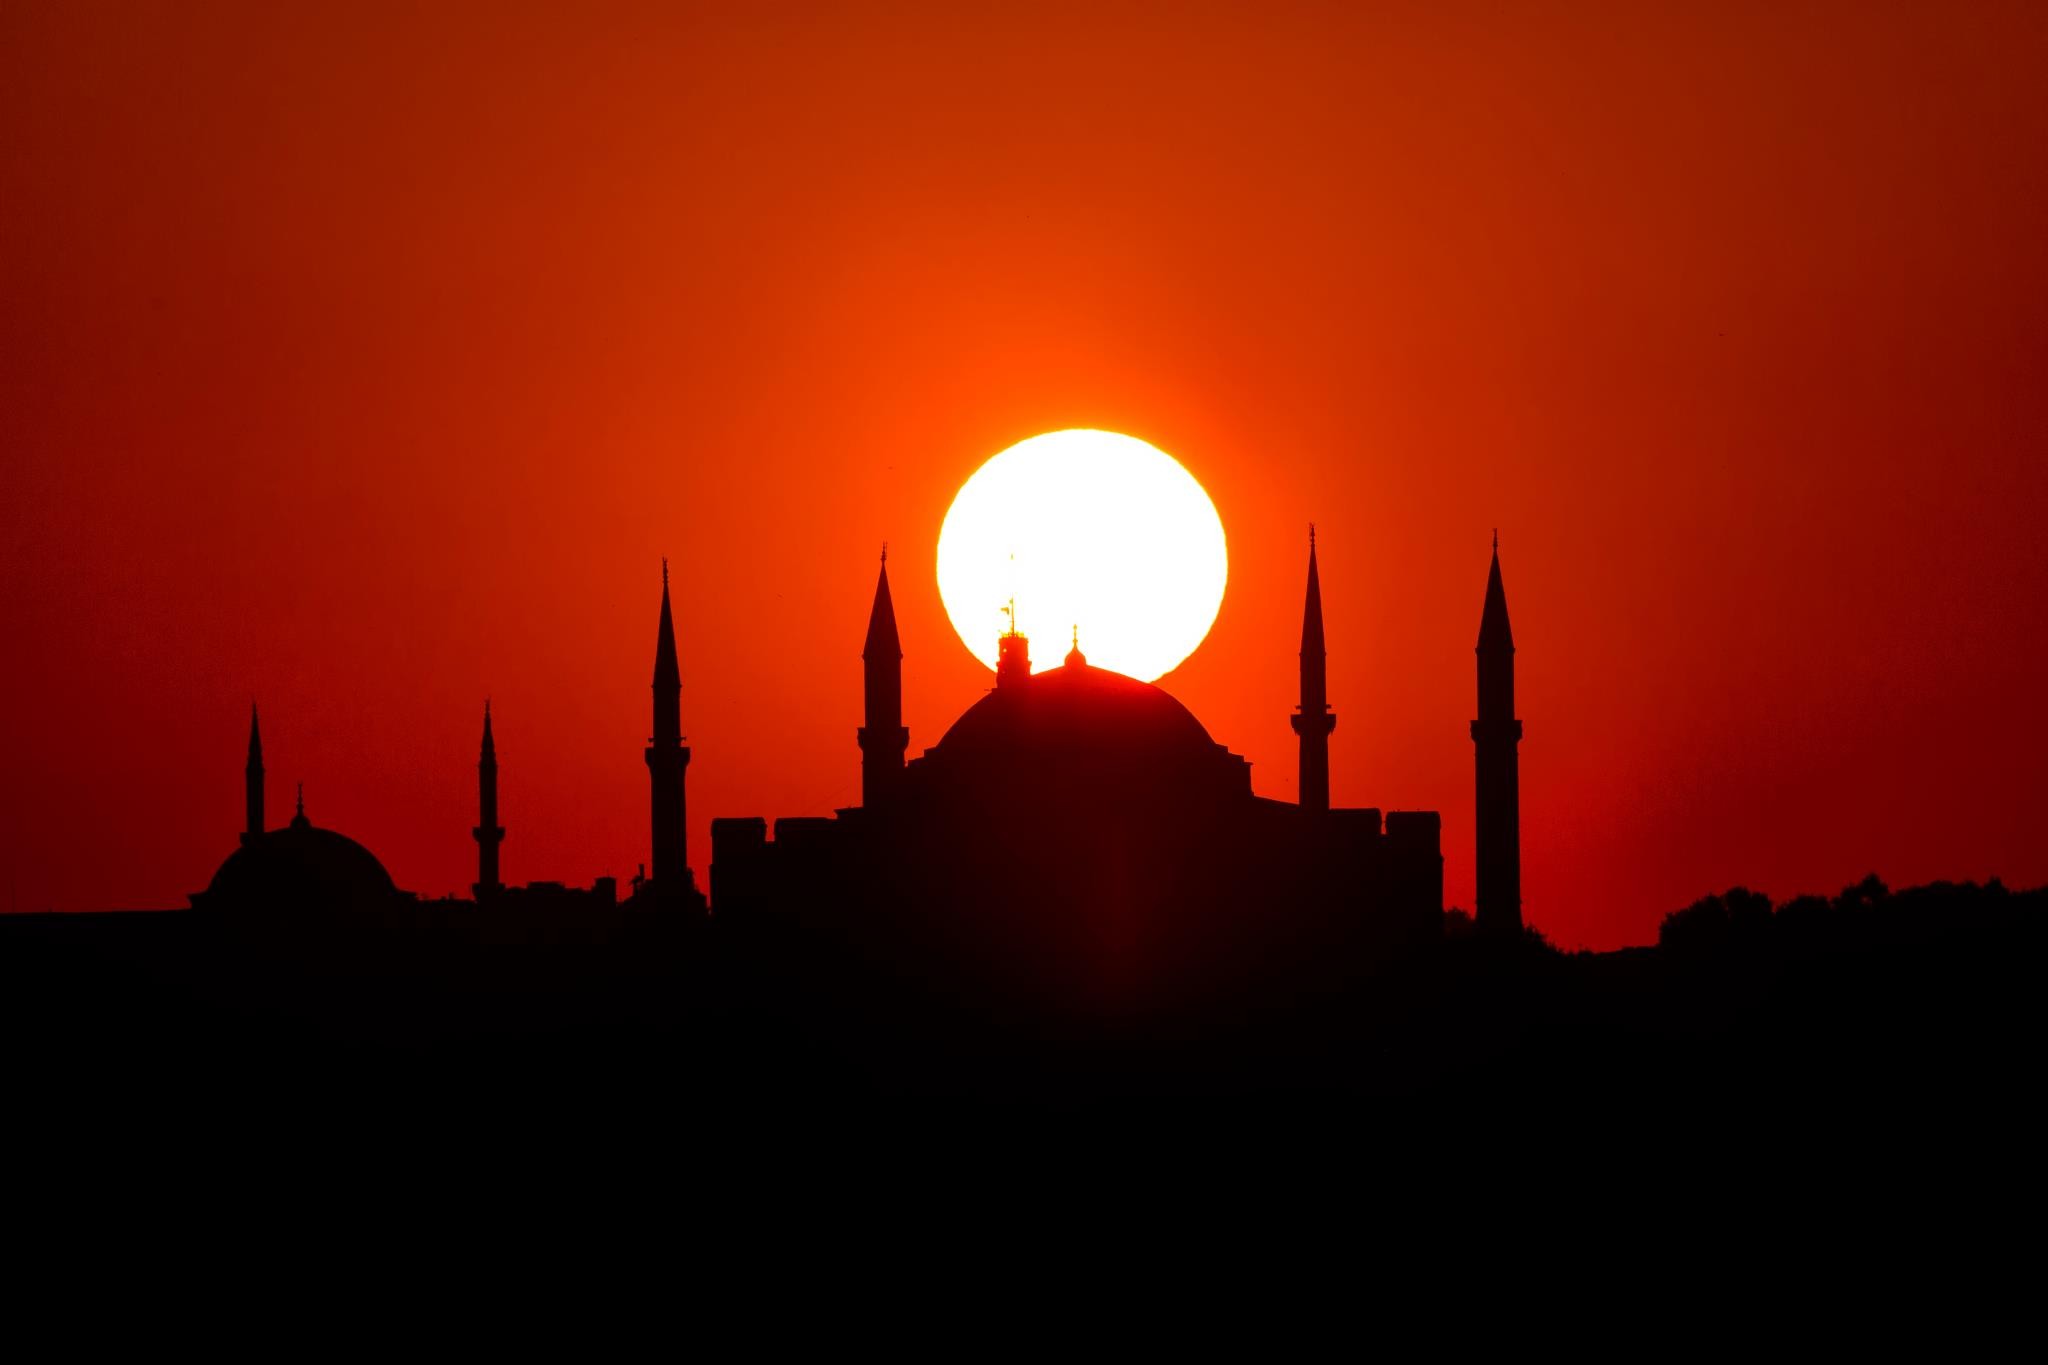 General 2048x1365 mosque silhouette color correction Islamic architecture red sky sky Sun building